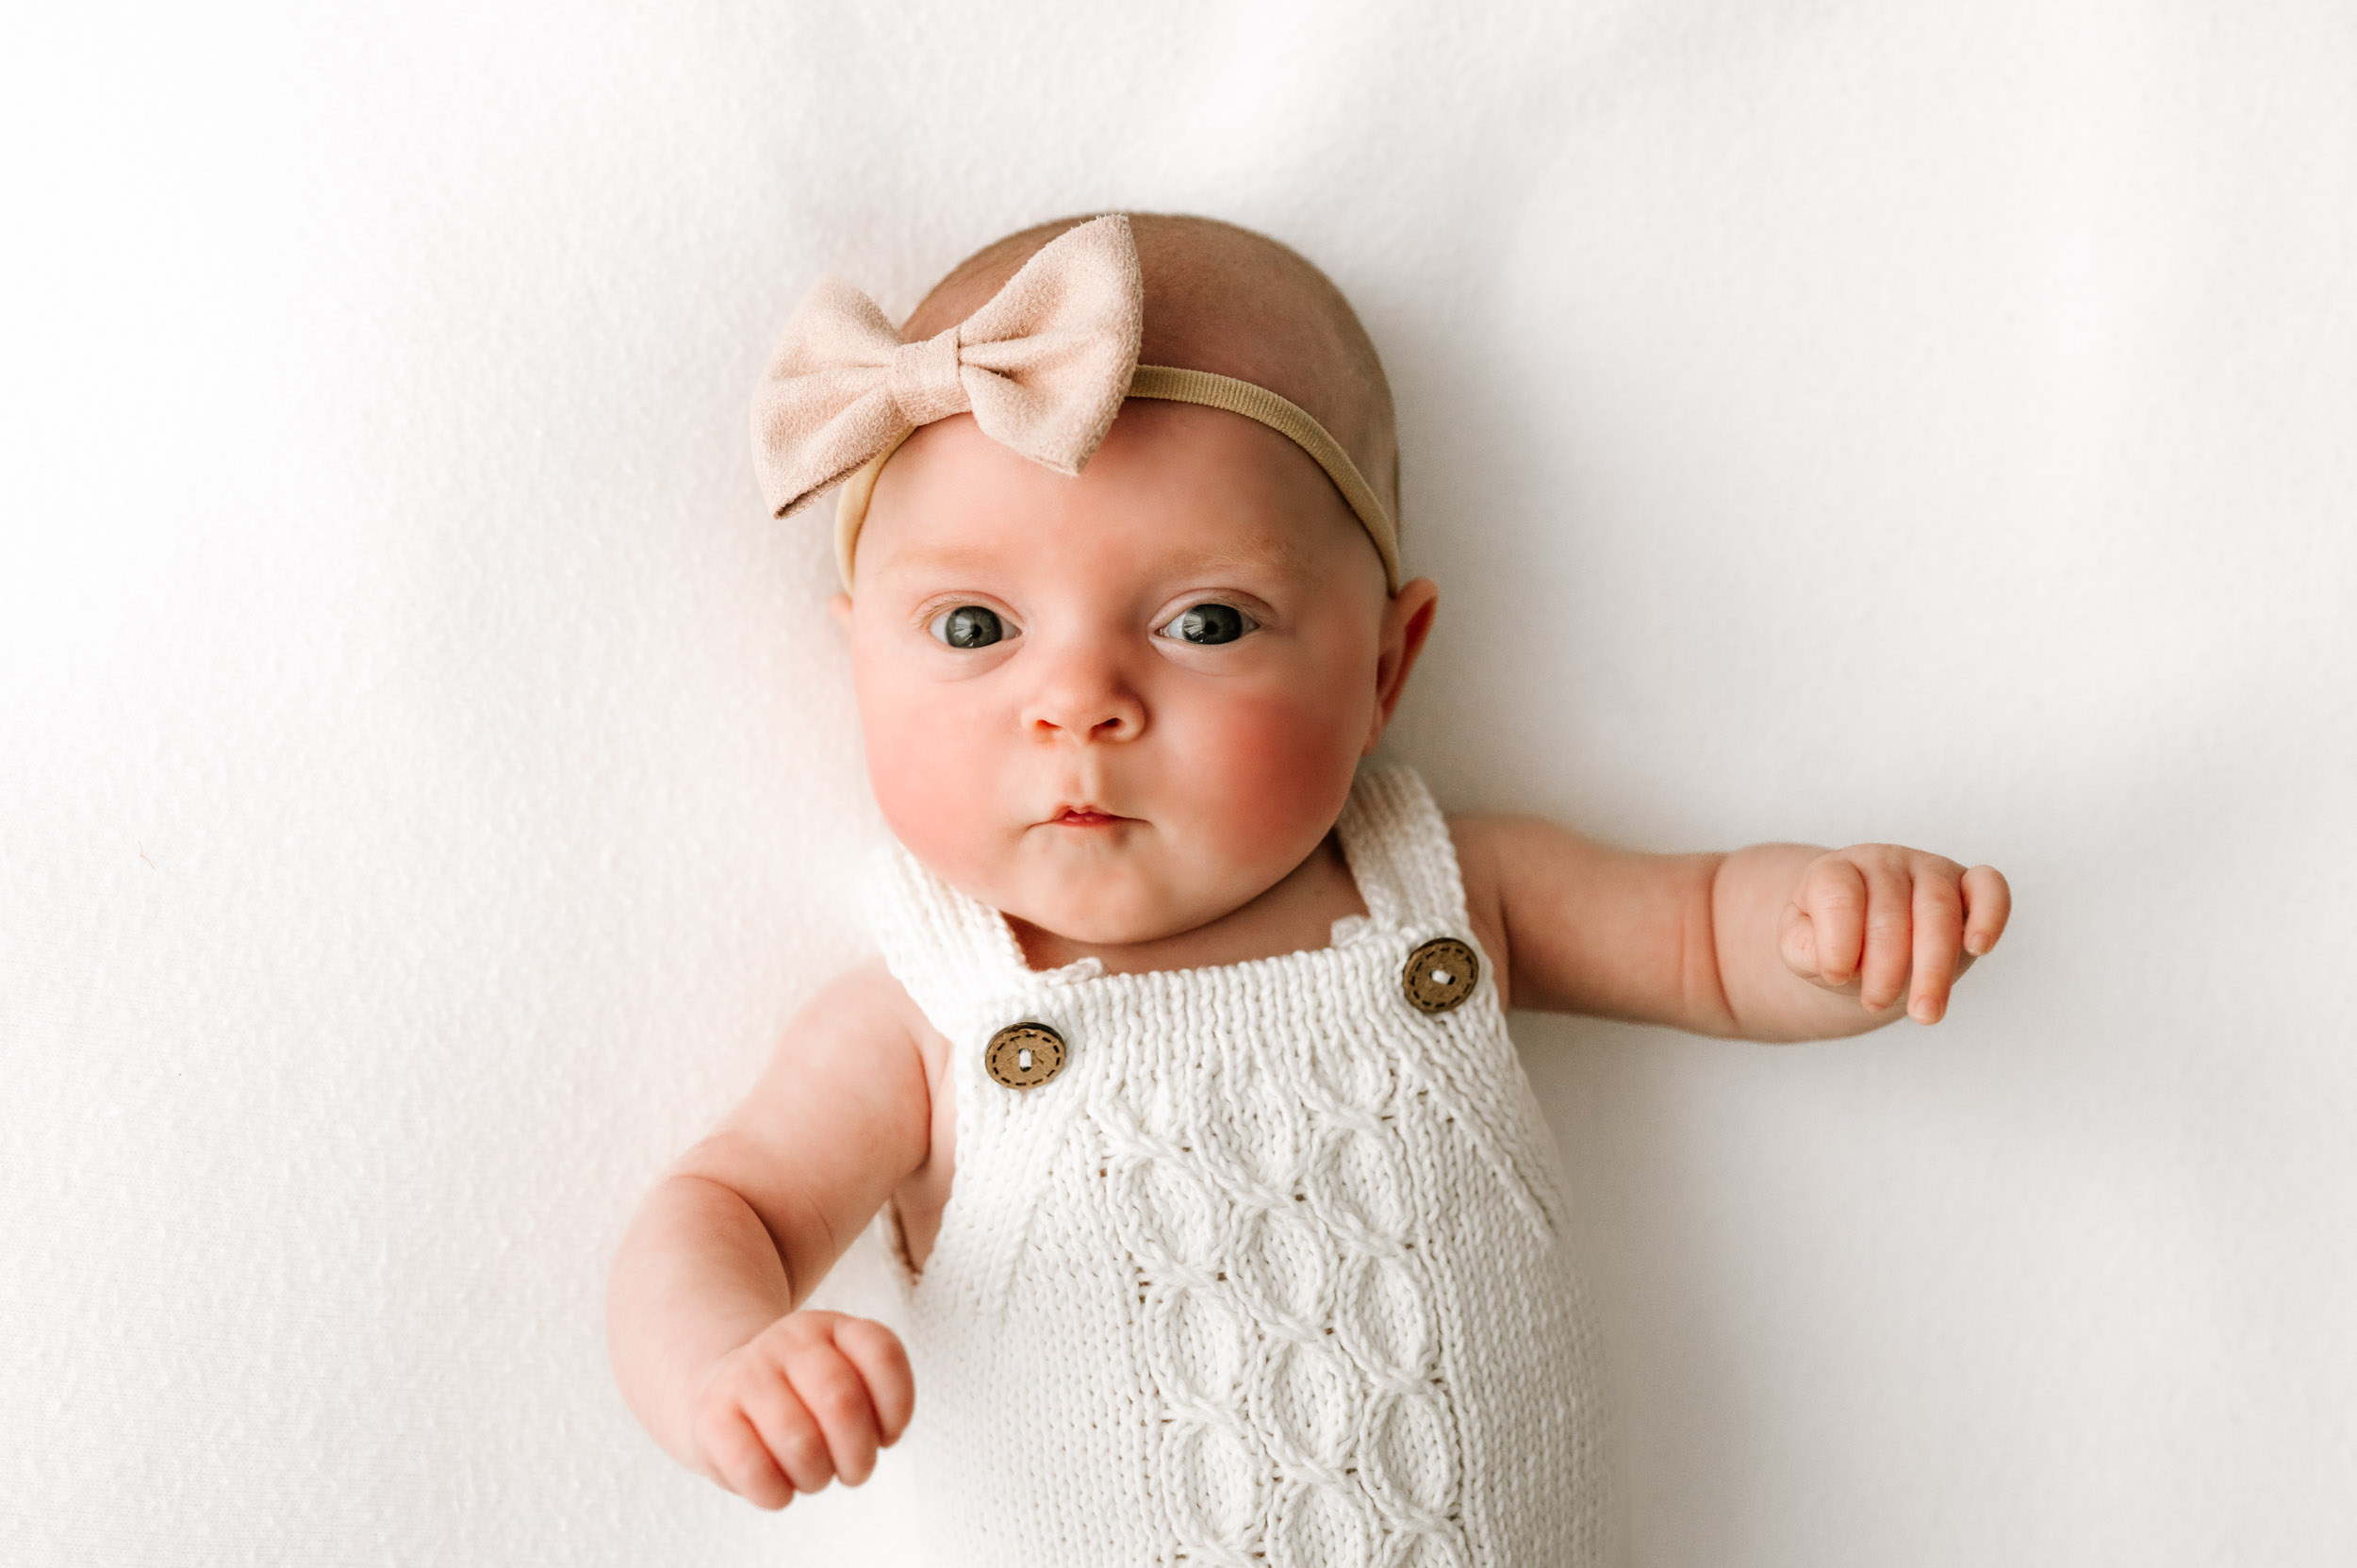 a baby girl wearing a white textured knit romper laying on a white backdrop and a pink headband bow looking directly at the camera